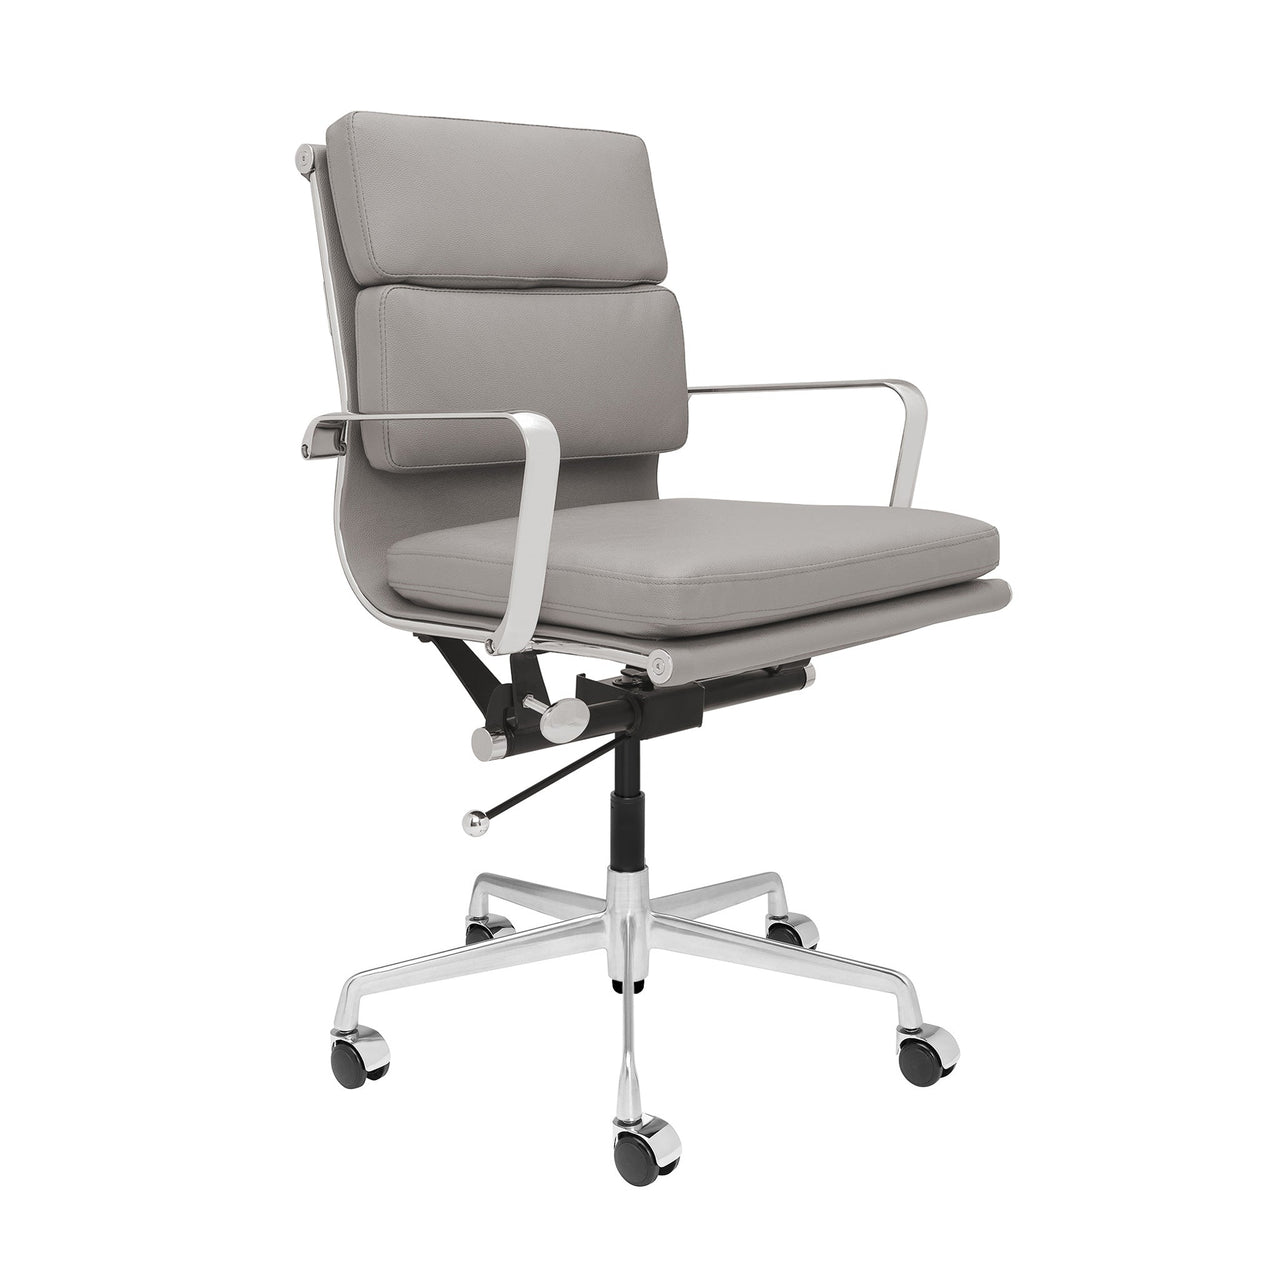 Classic SOHO Soft Padded Management Chair (Grey)